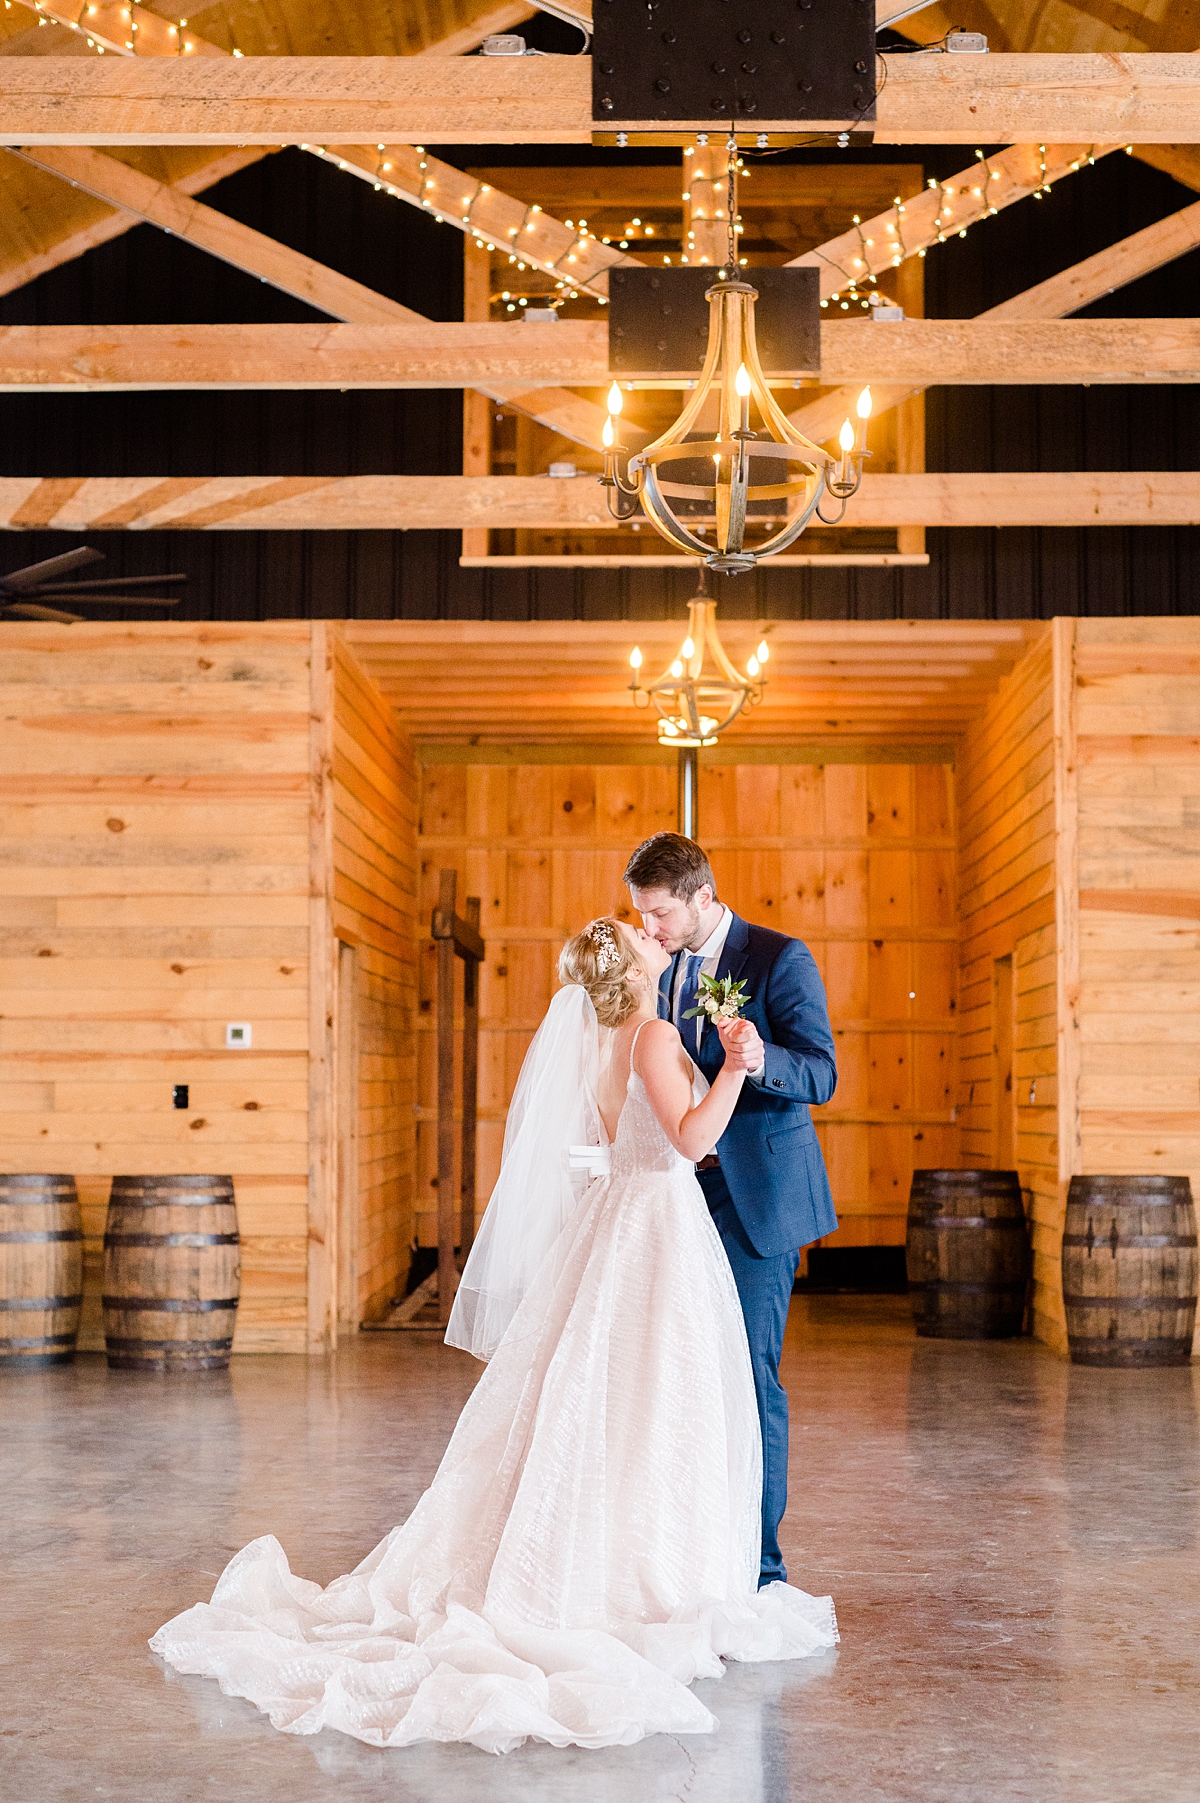 First Dance at East View Farms Wedding Styled Shoot by Heather Lea Events and Virginia Wedding Photographer Kailey Brianne Photography. 